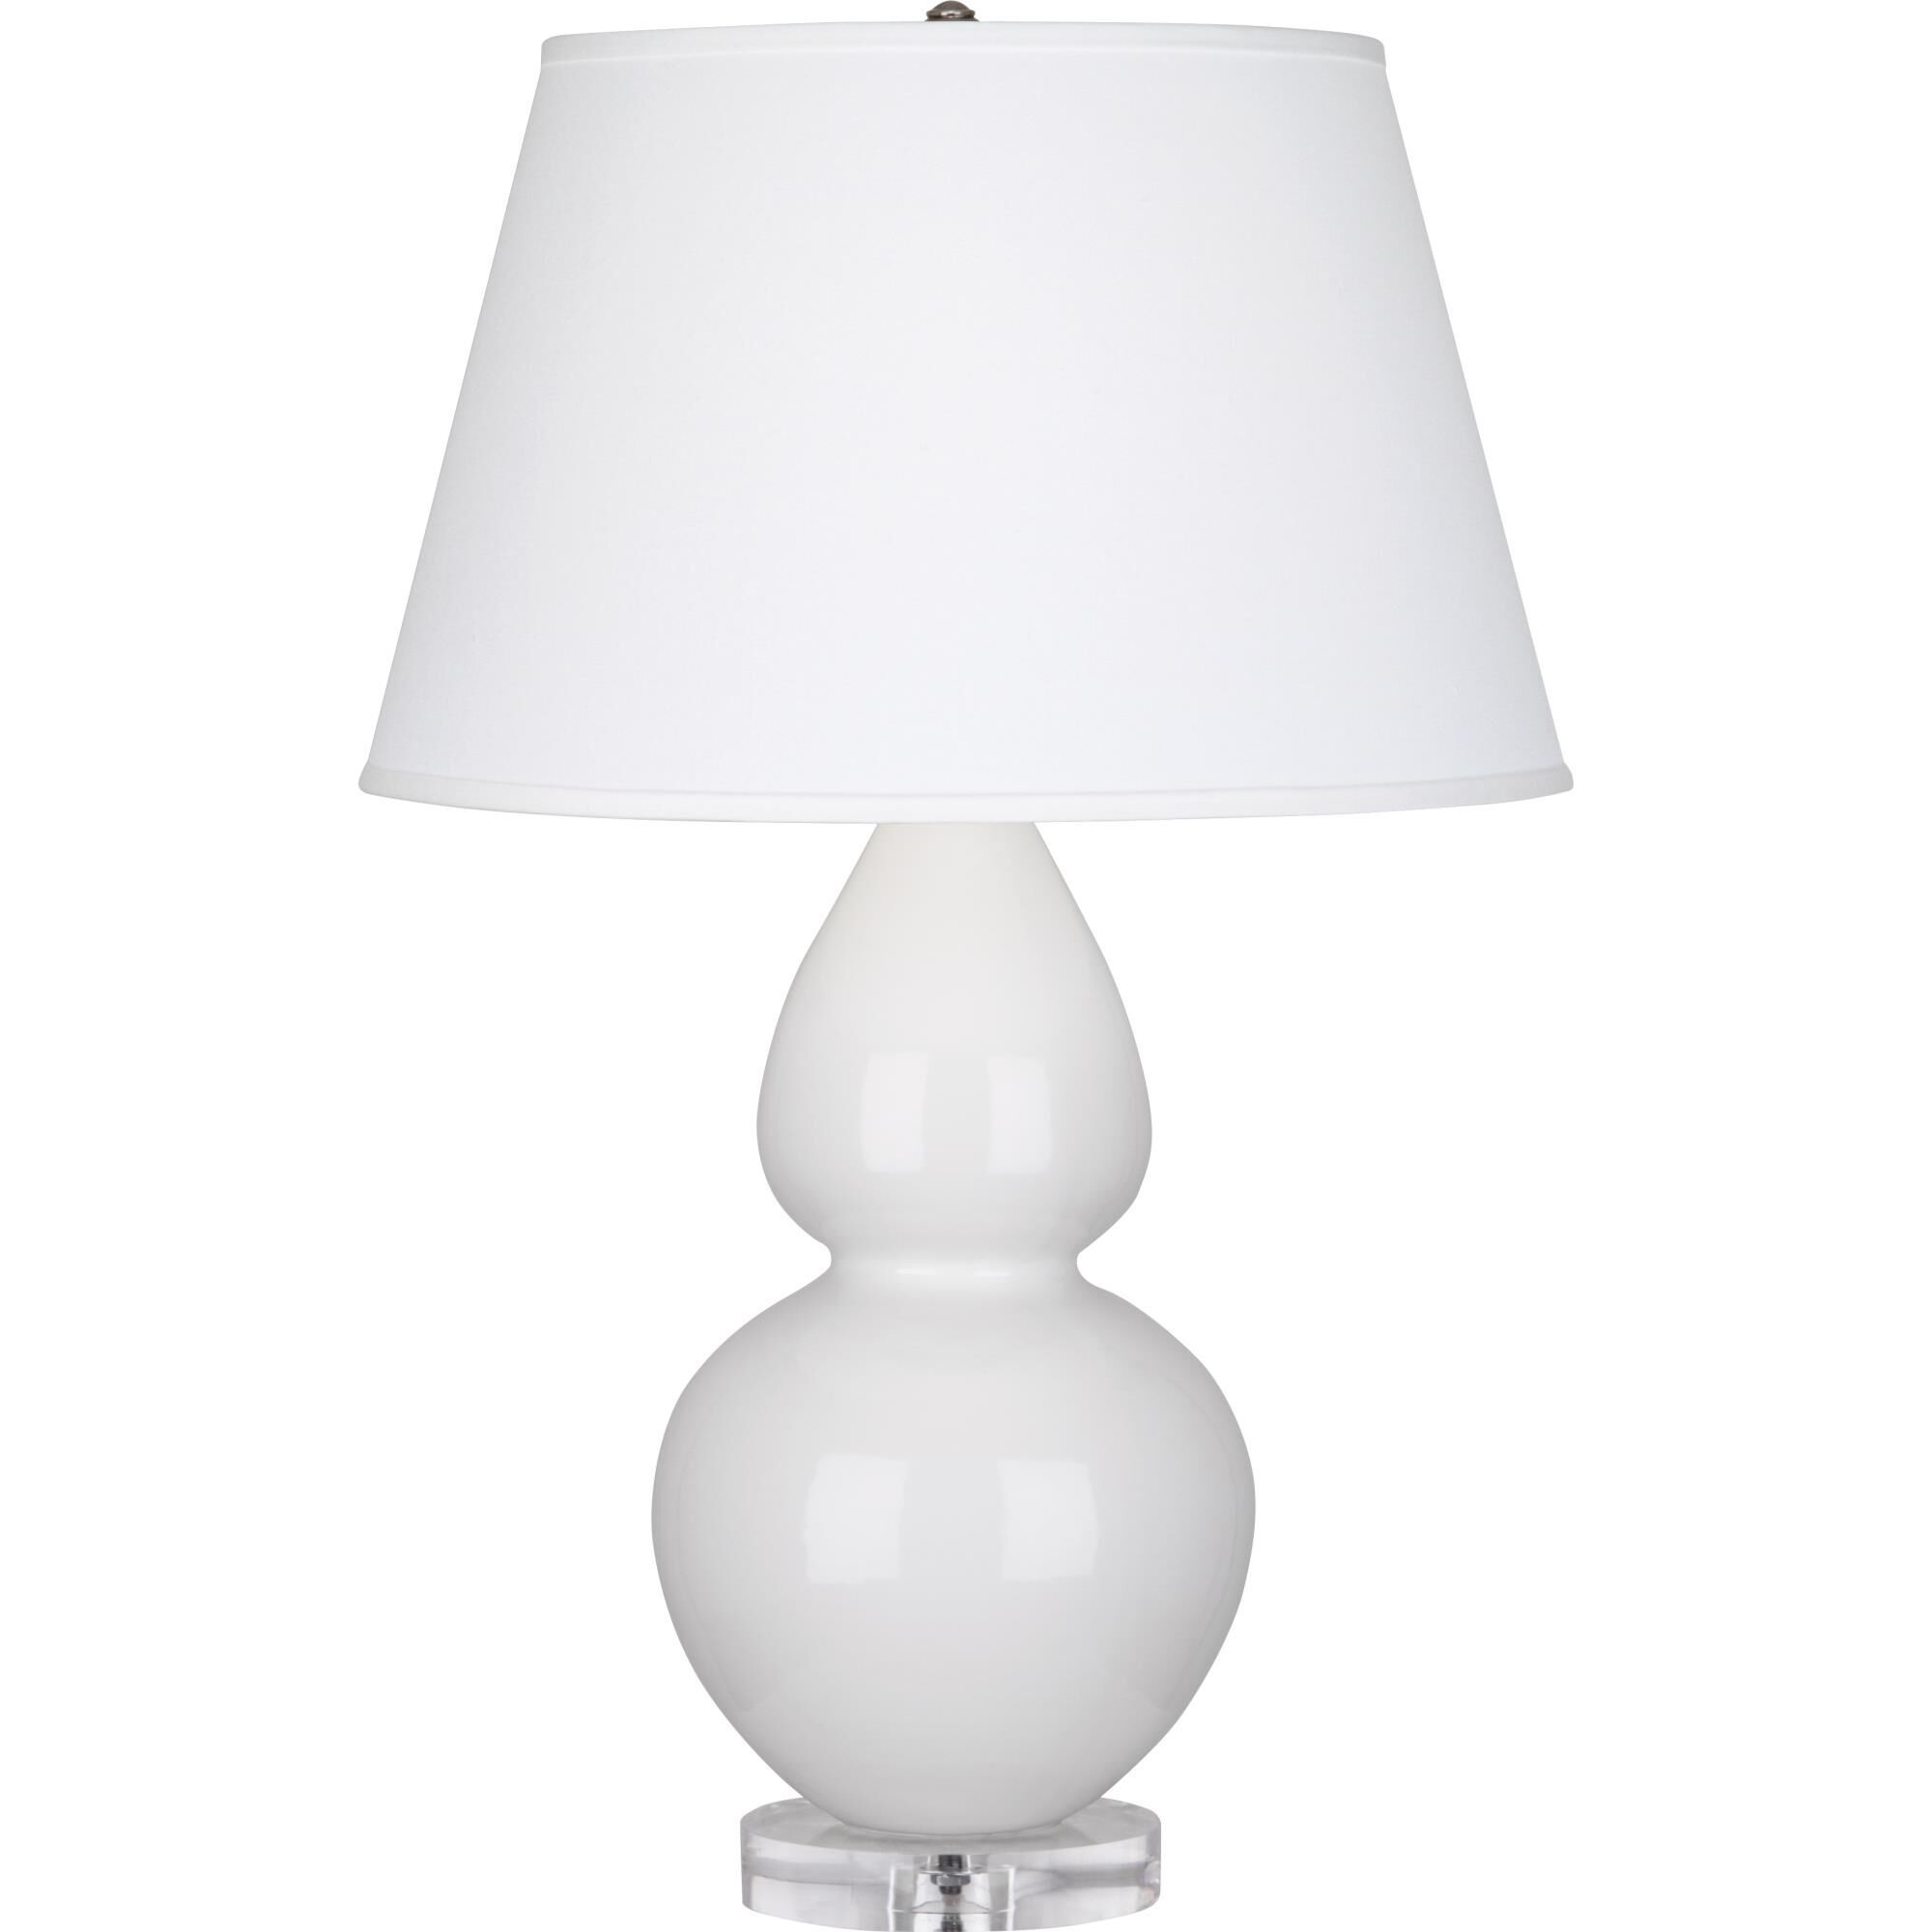 Double Gourd 30 Inch Table Lamp by Robert Abbey | Capitol Lighting 1800lighting.com